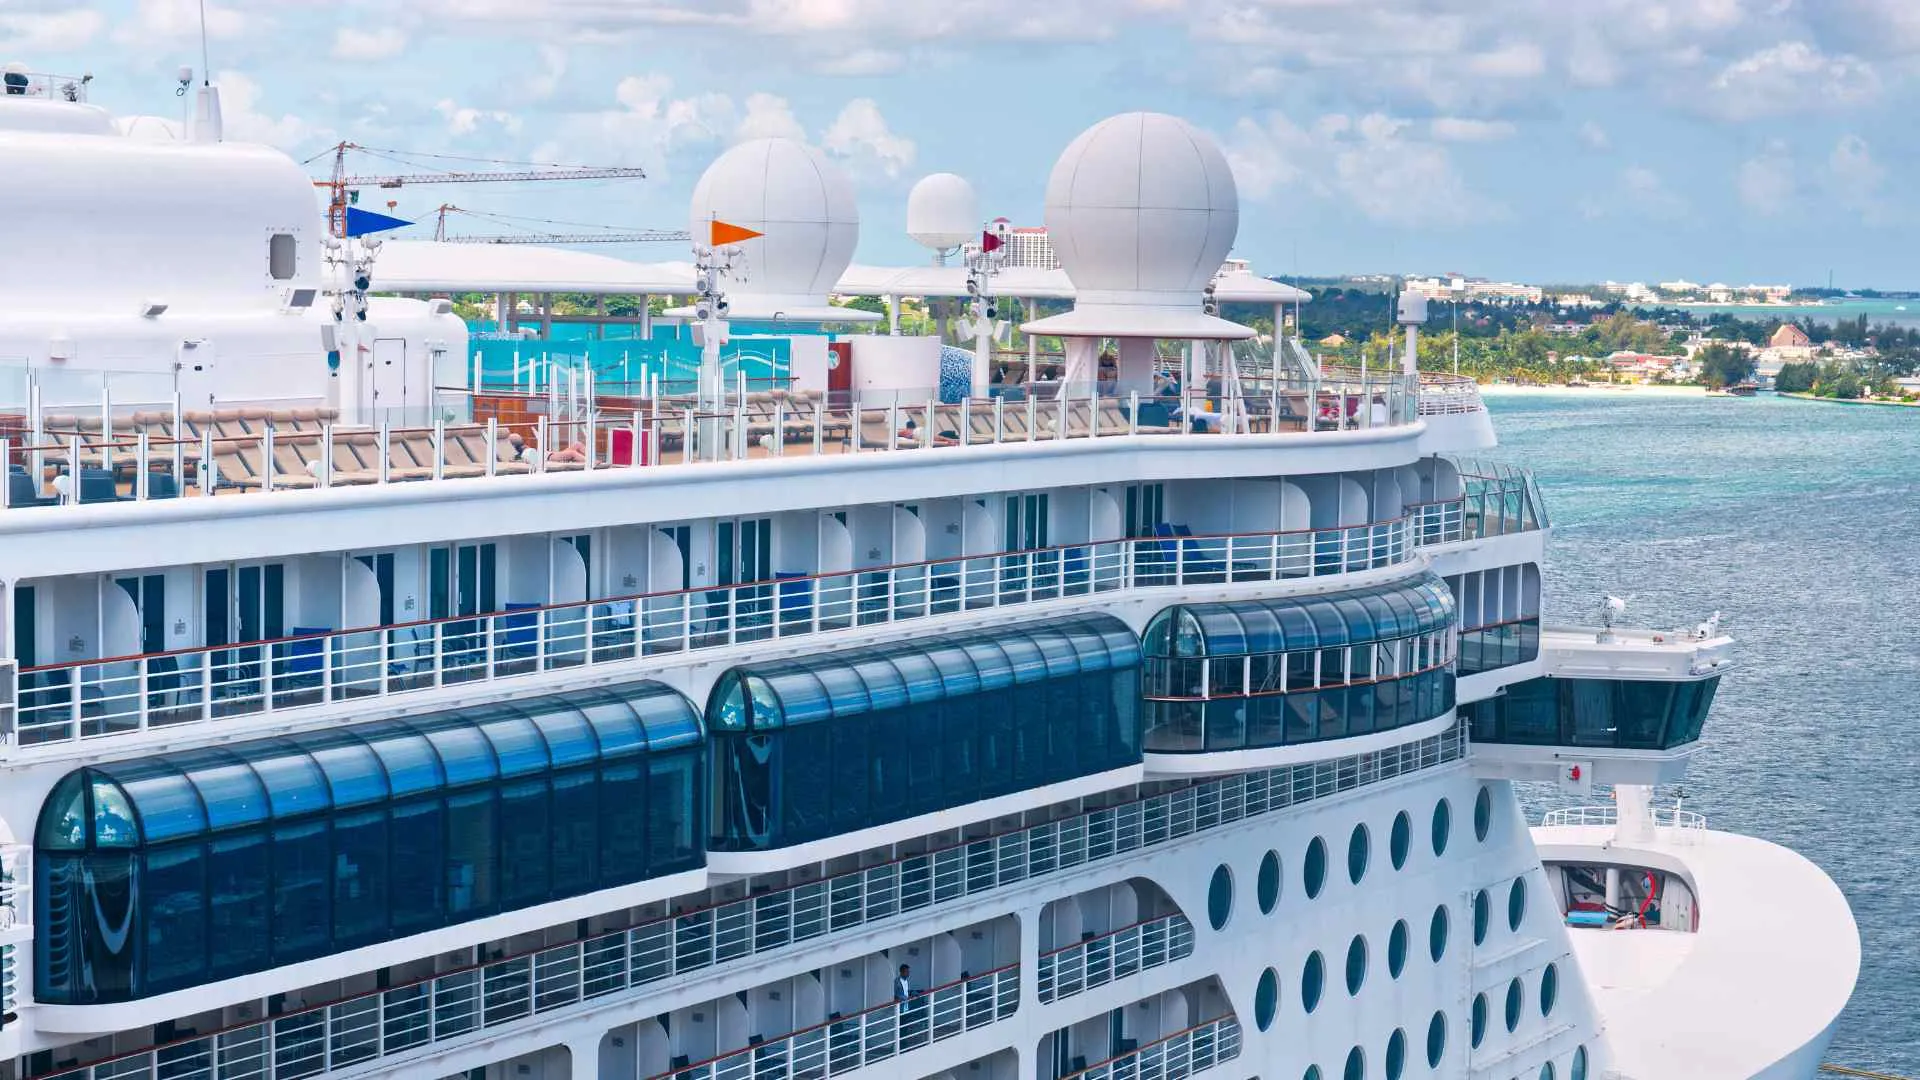 Liberty of the Seas cabins to avoid